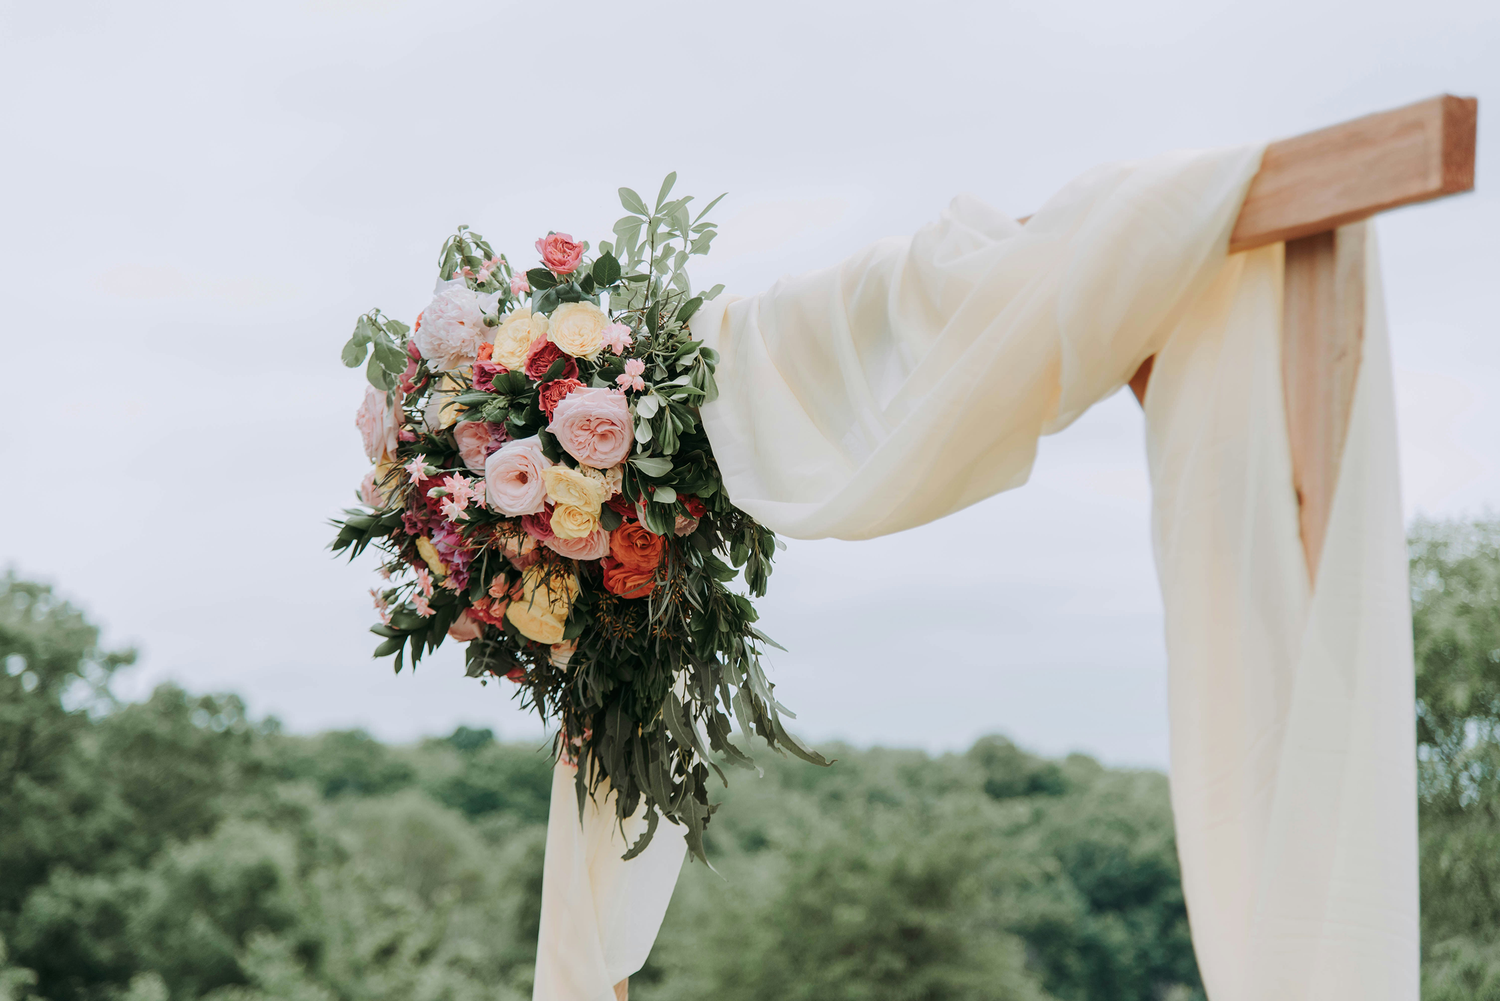 Cost of a wedding ceremony and average budget breakdown